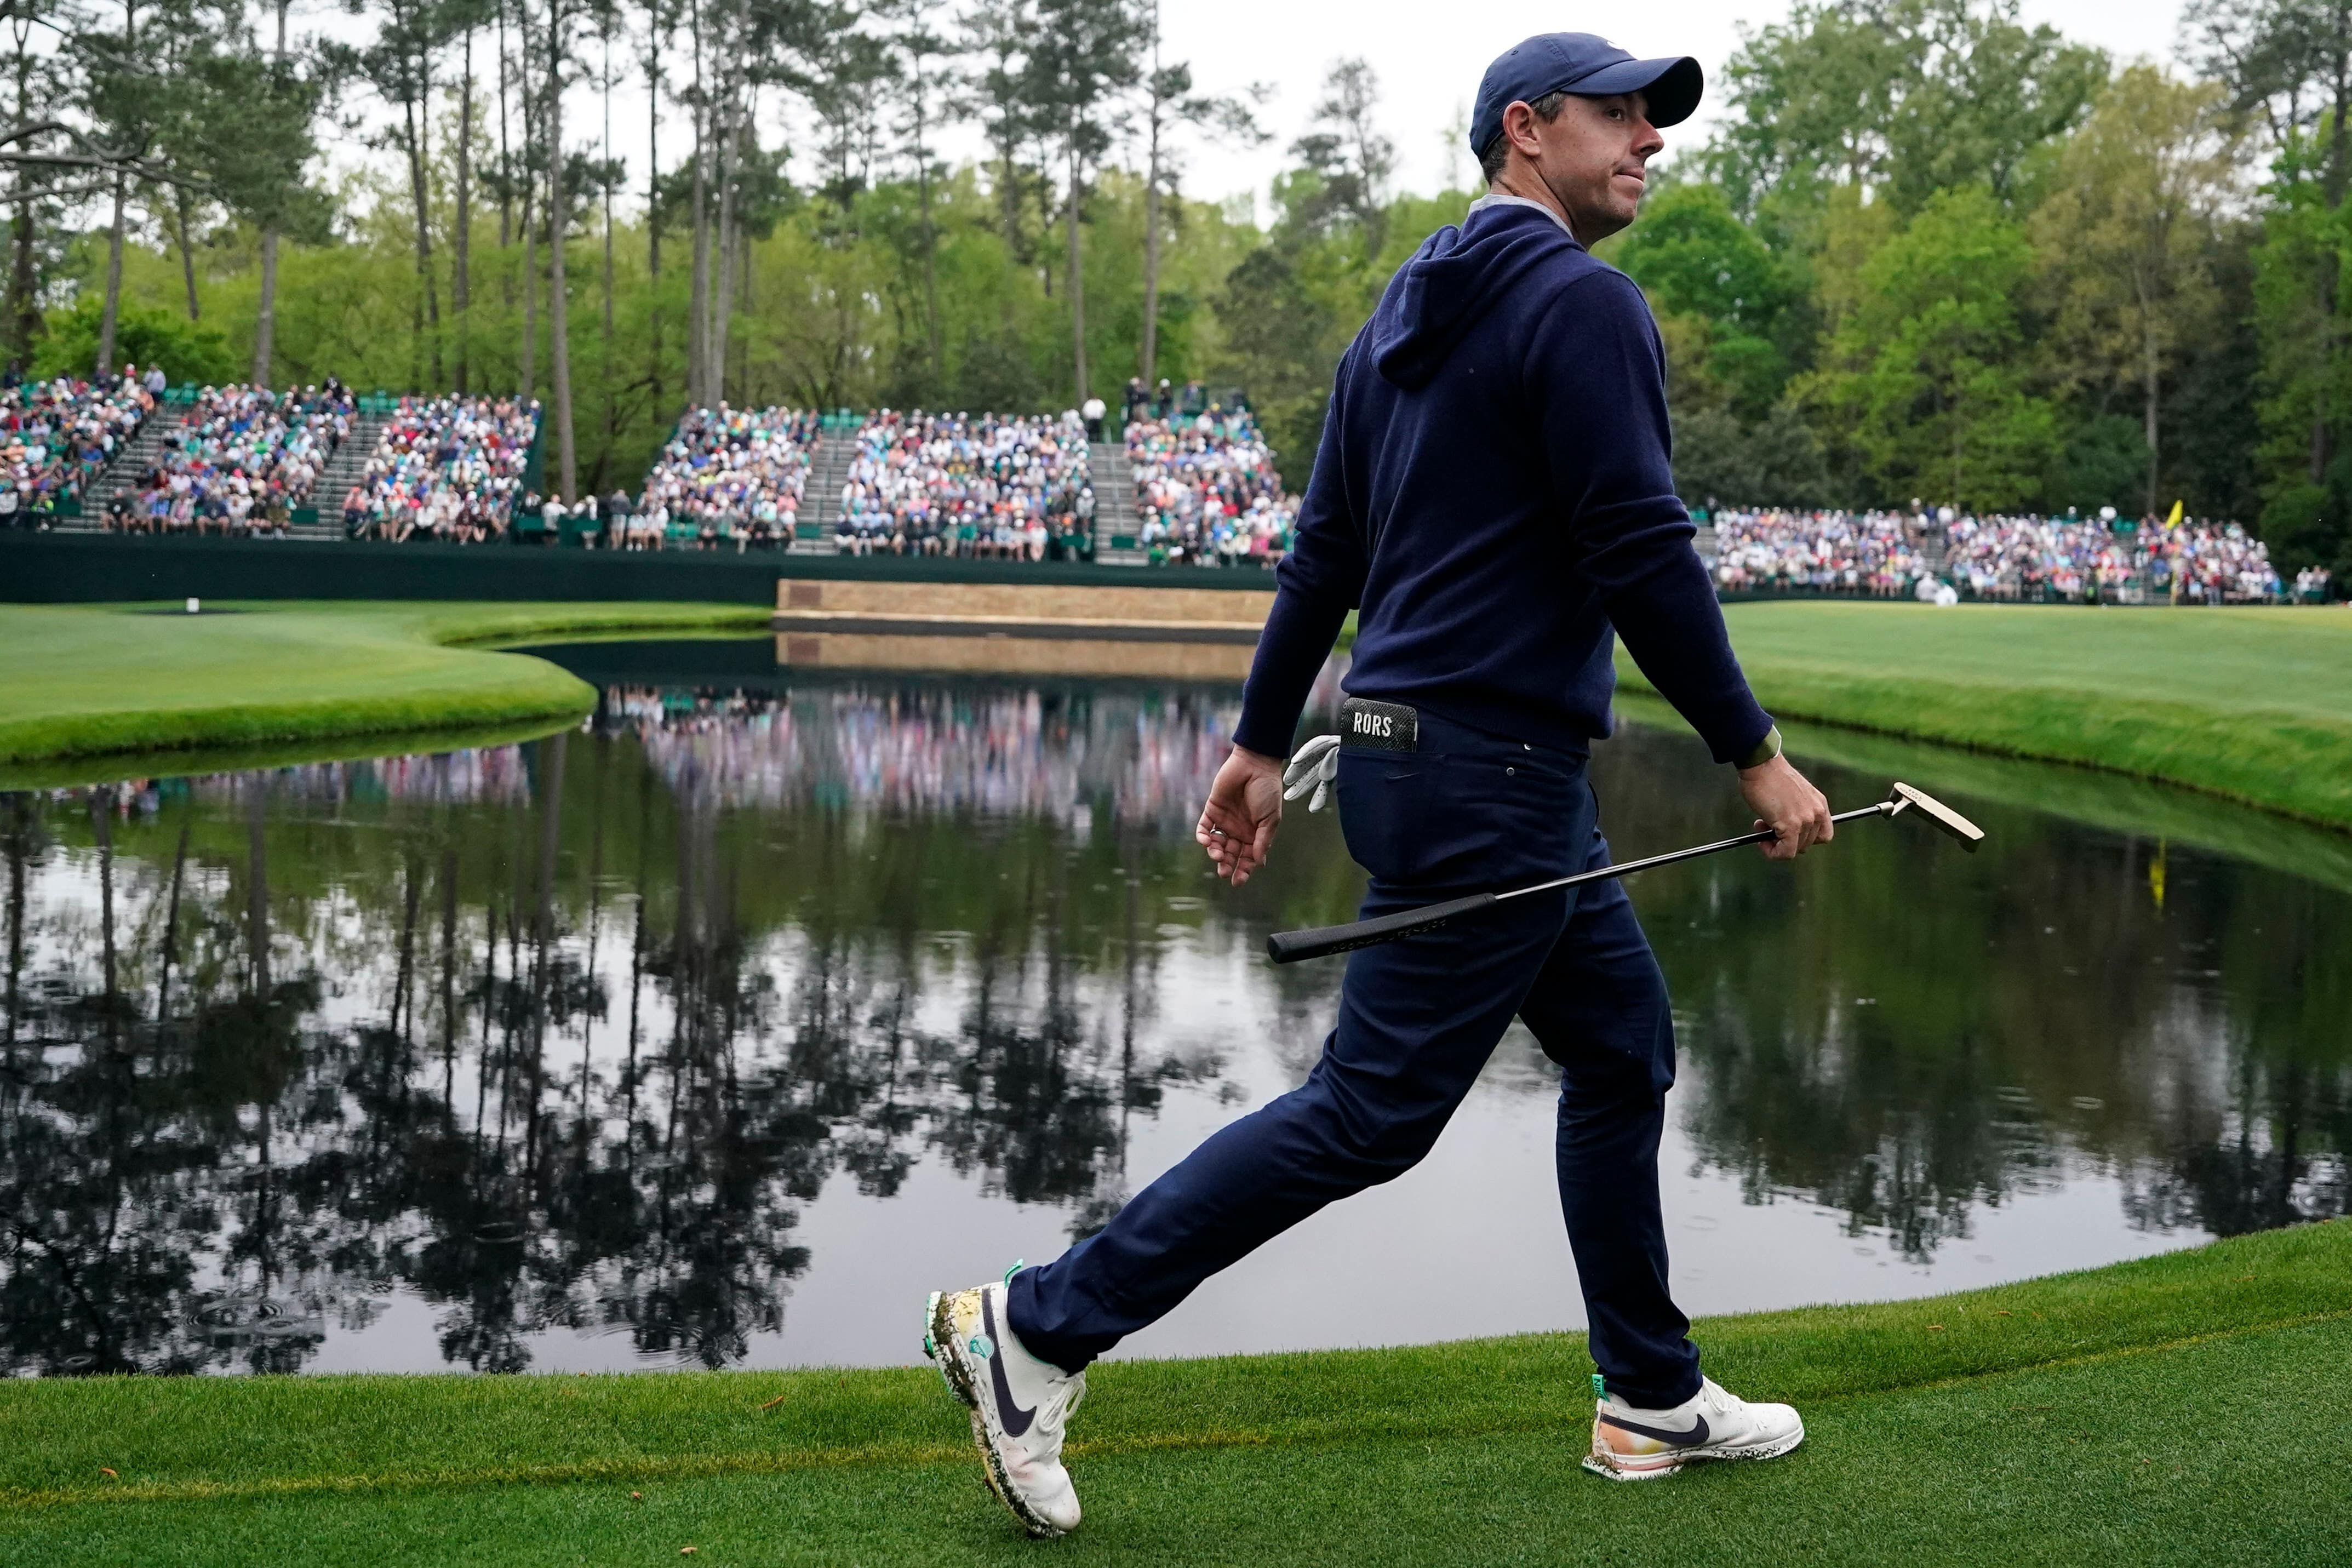 Rory McIlroy needs to win the Masters to complete a career grand slam (AP Photo/Jae C. Hong)